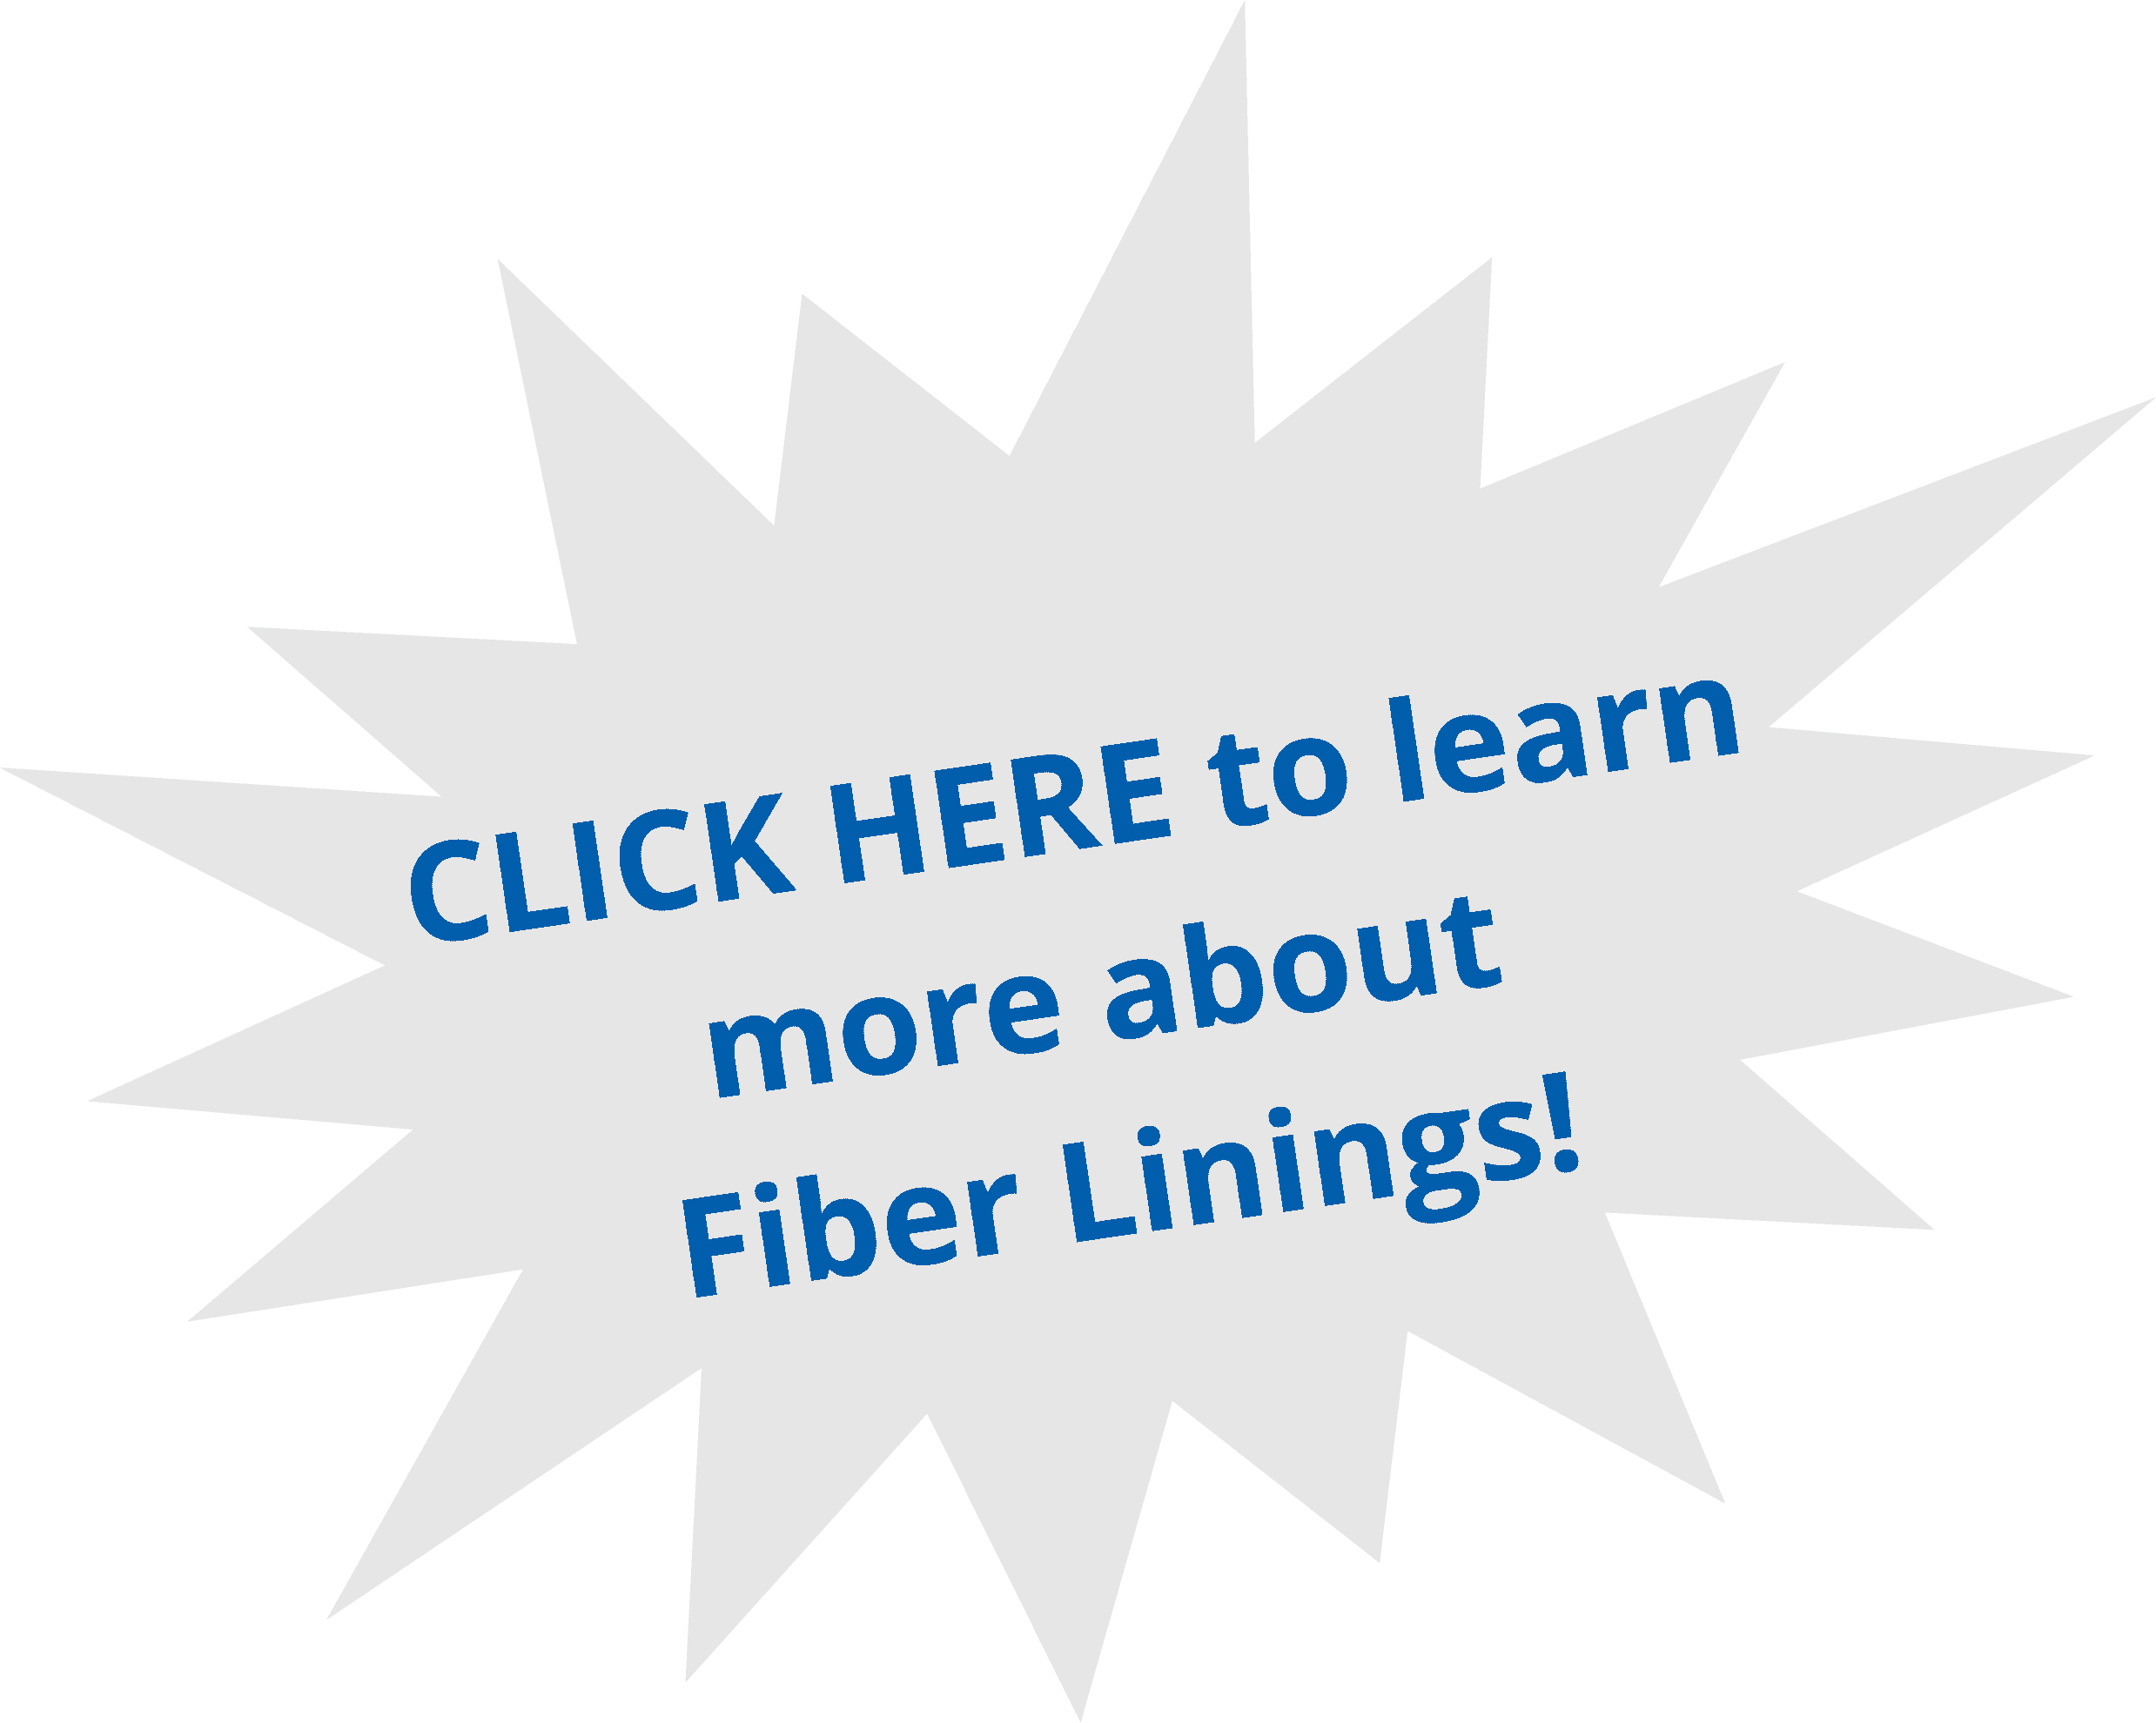 Learn more about fiber linings